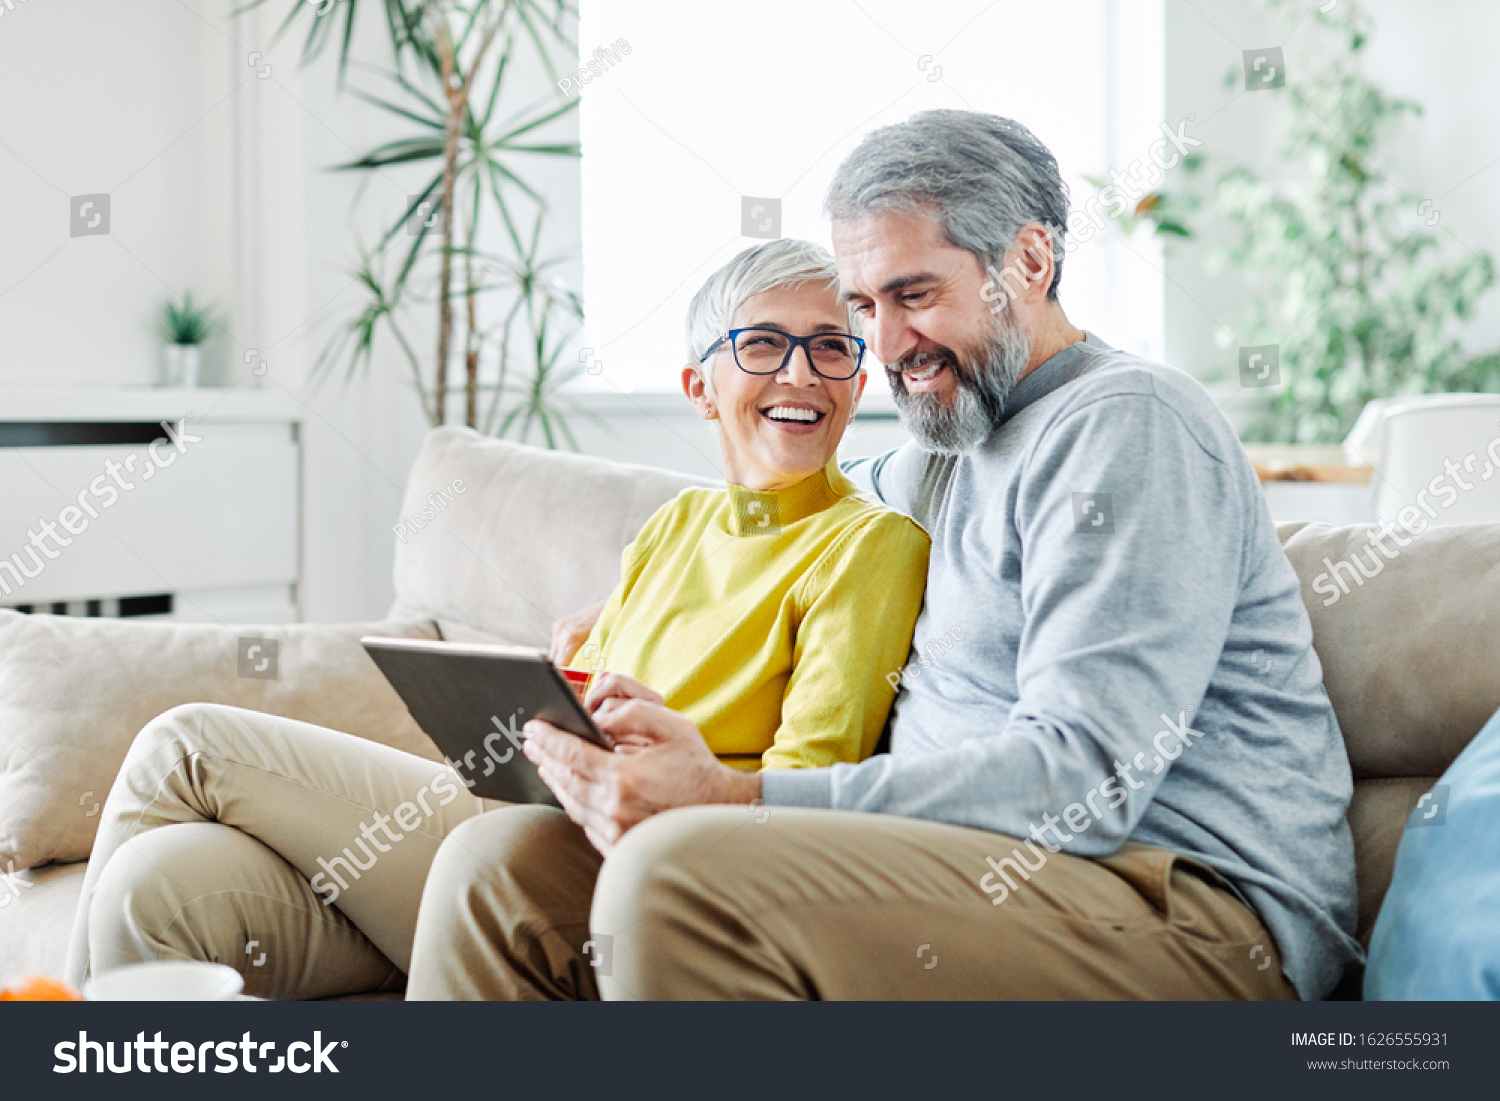 portrait of happy smiling senior couple using tablet at home #1626555931